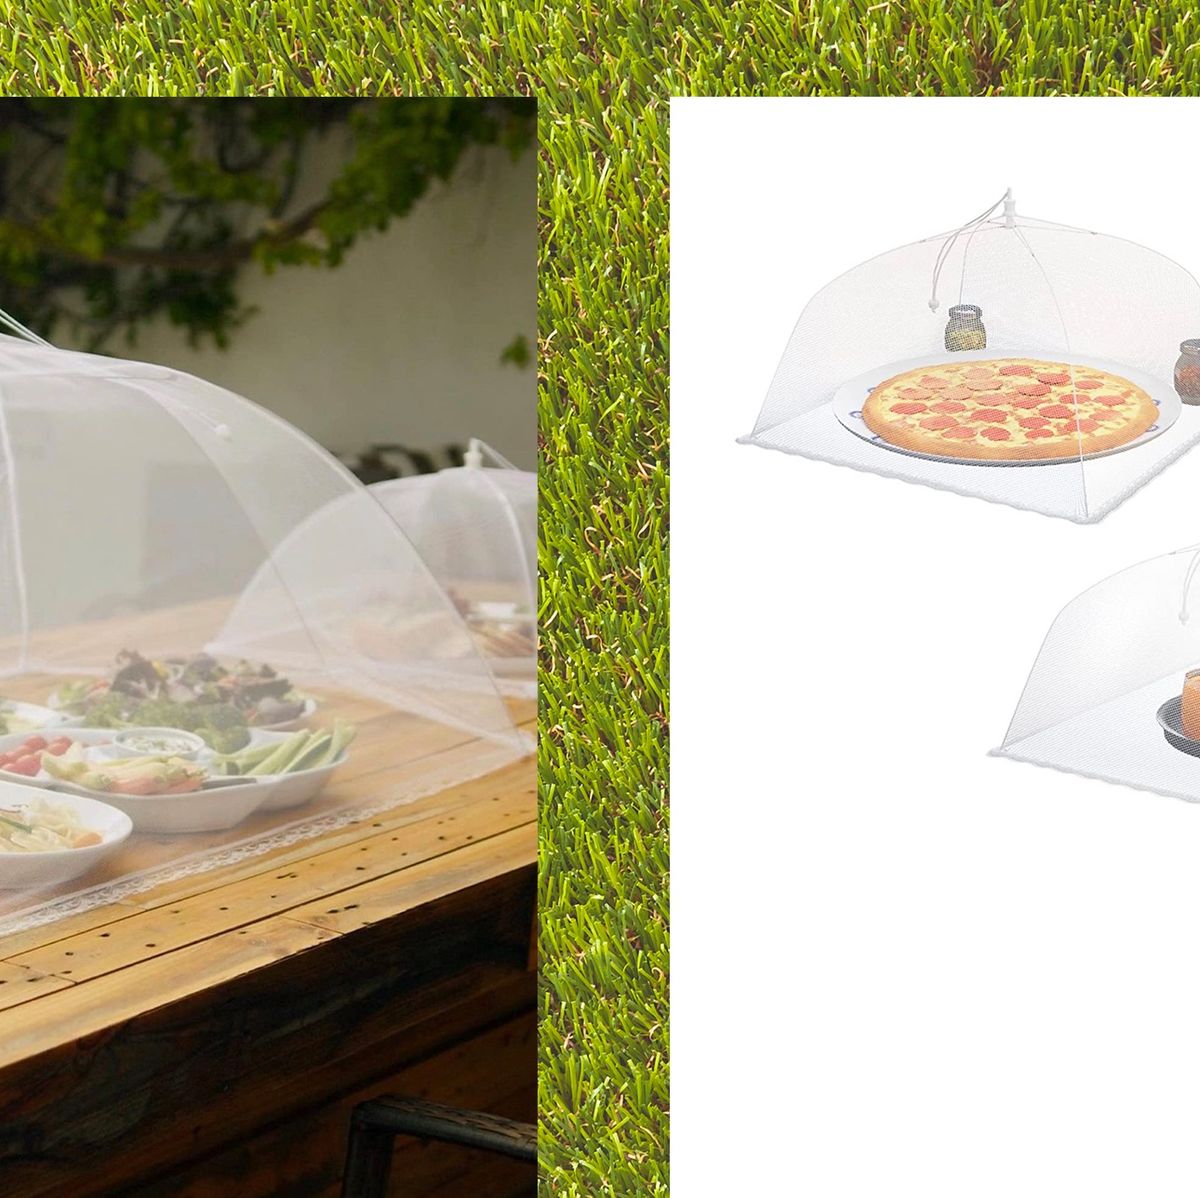 The Best Outdoor Food Covers  Reviews, Ratings, Comparisons